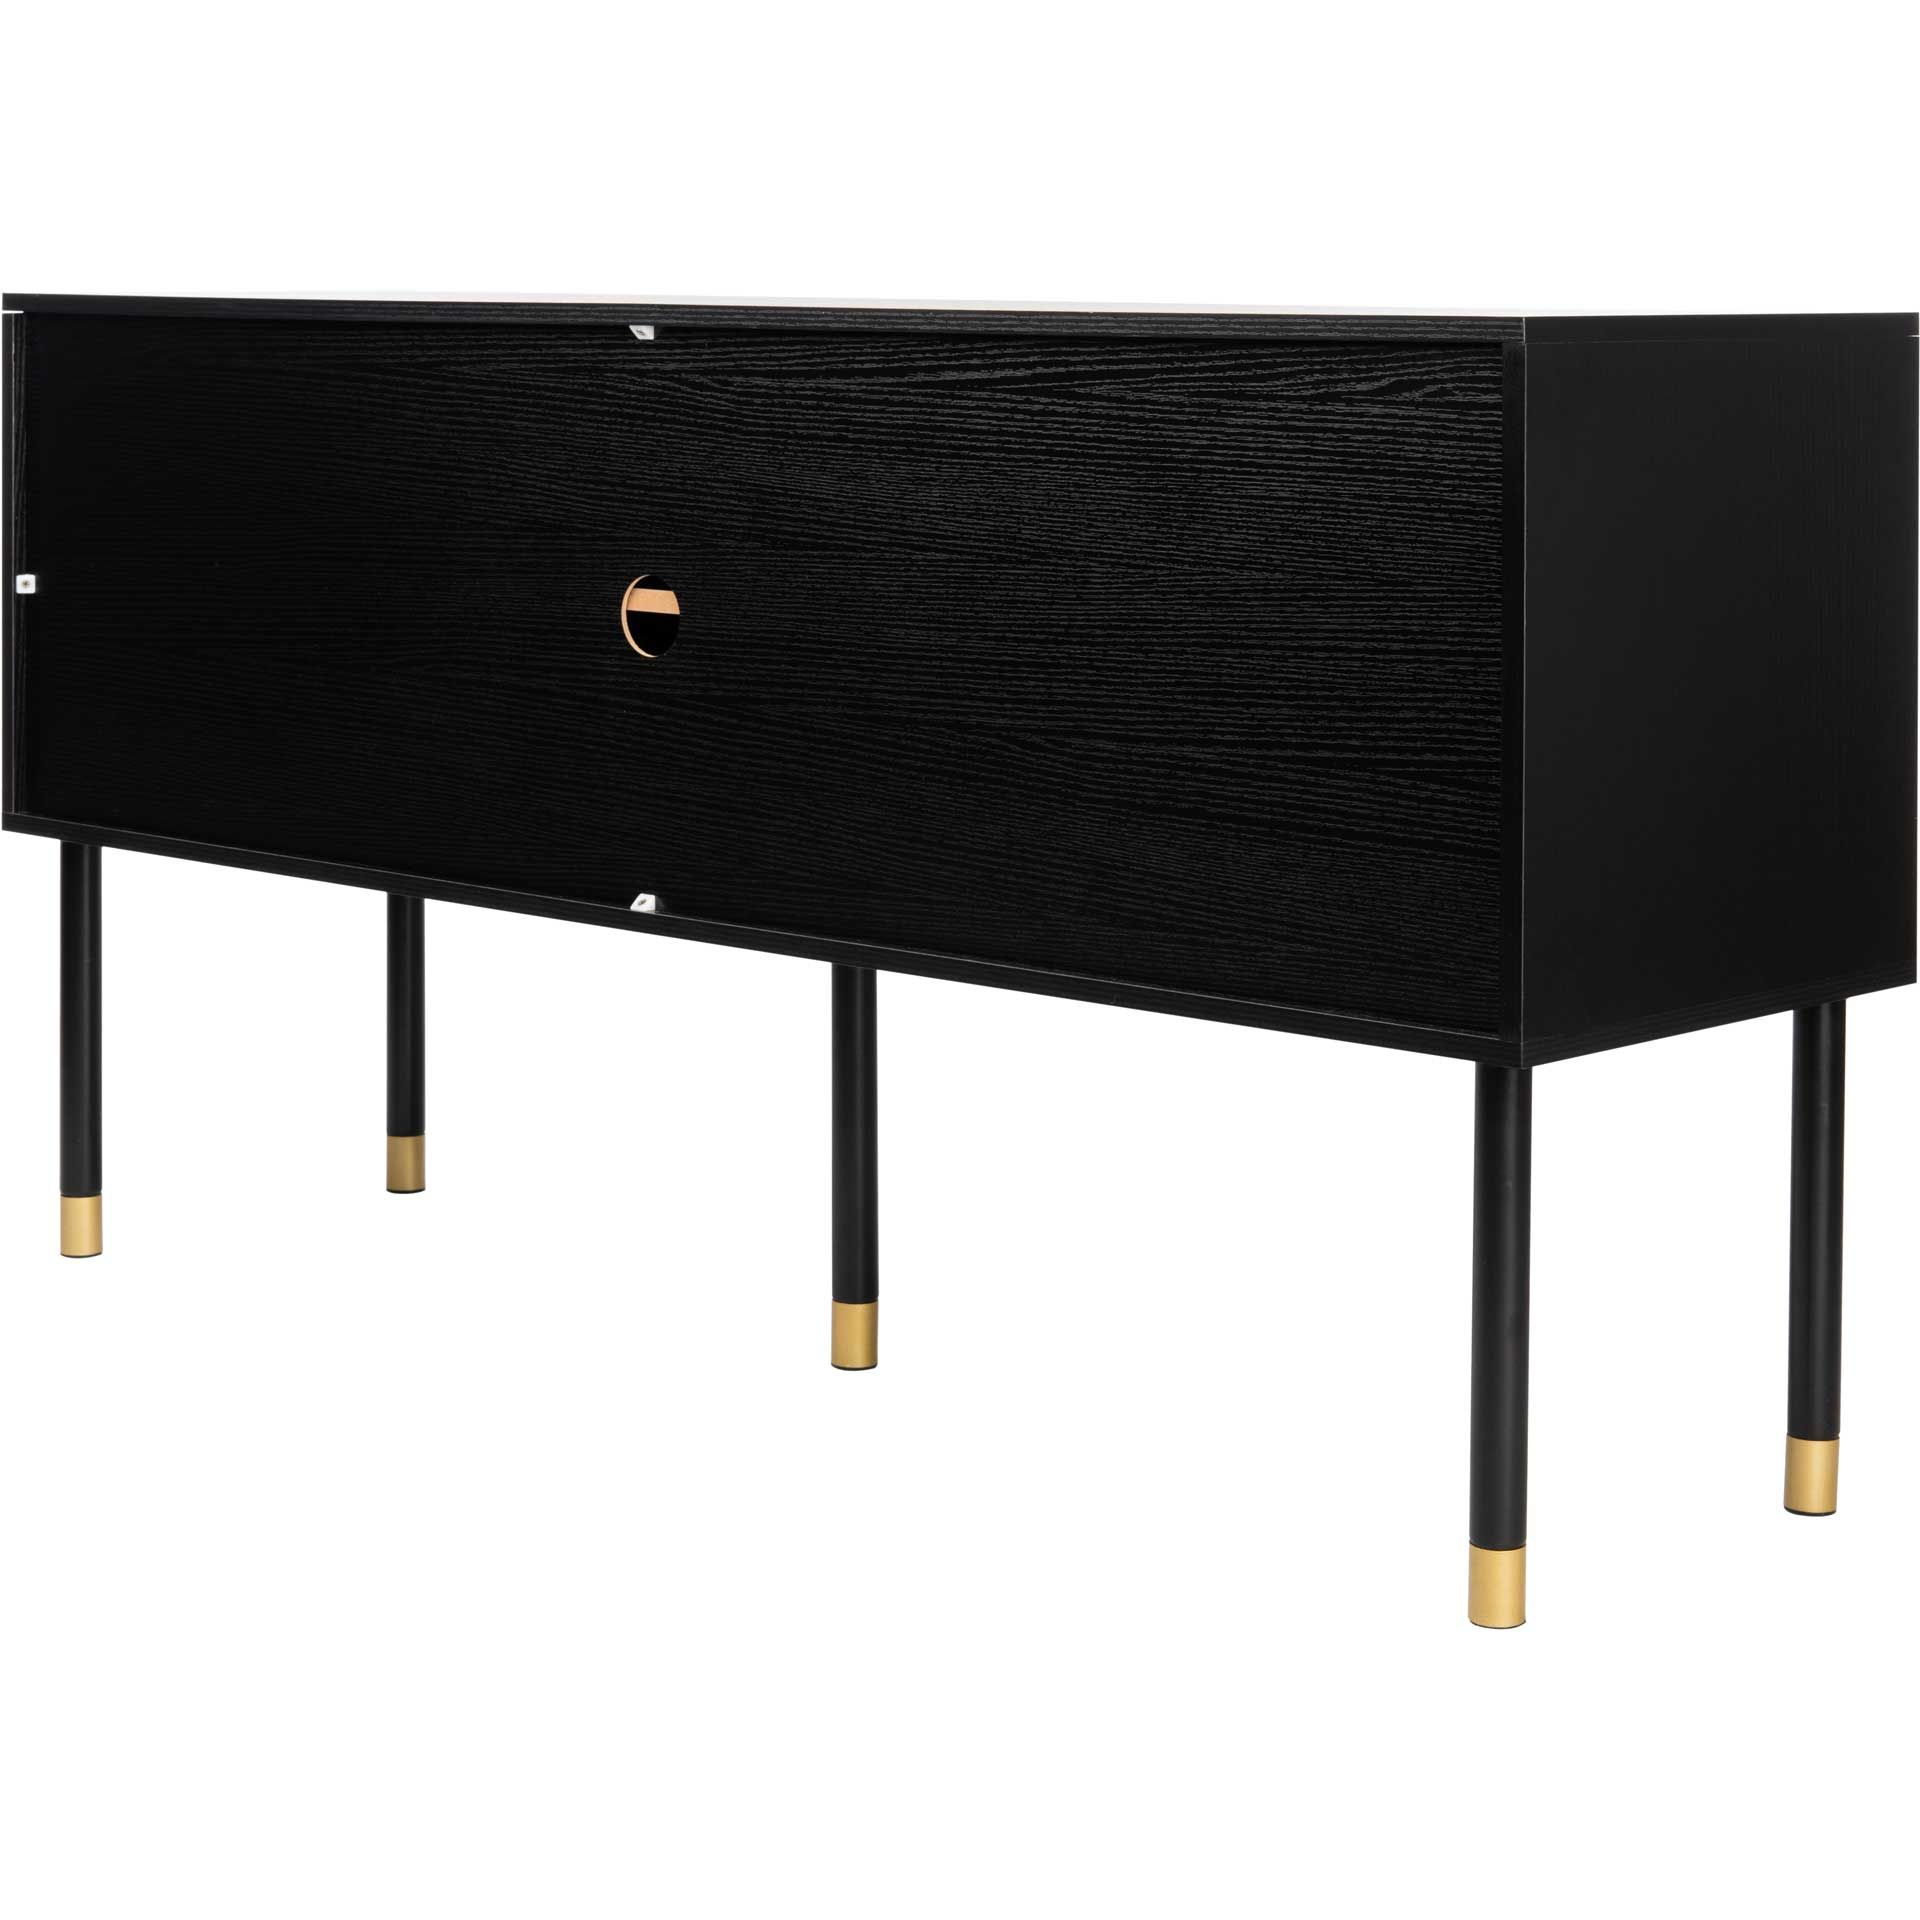 Most Recent Oaklee Tv Stand Black/white/gold – Froy In Oaklee Tv Stands (View 4 of 15)